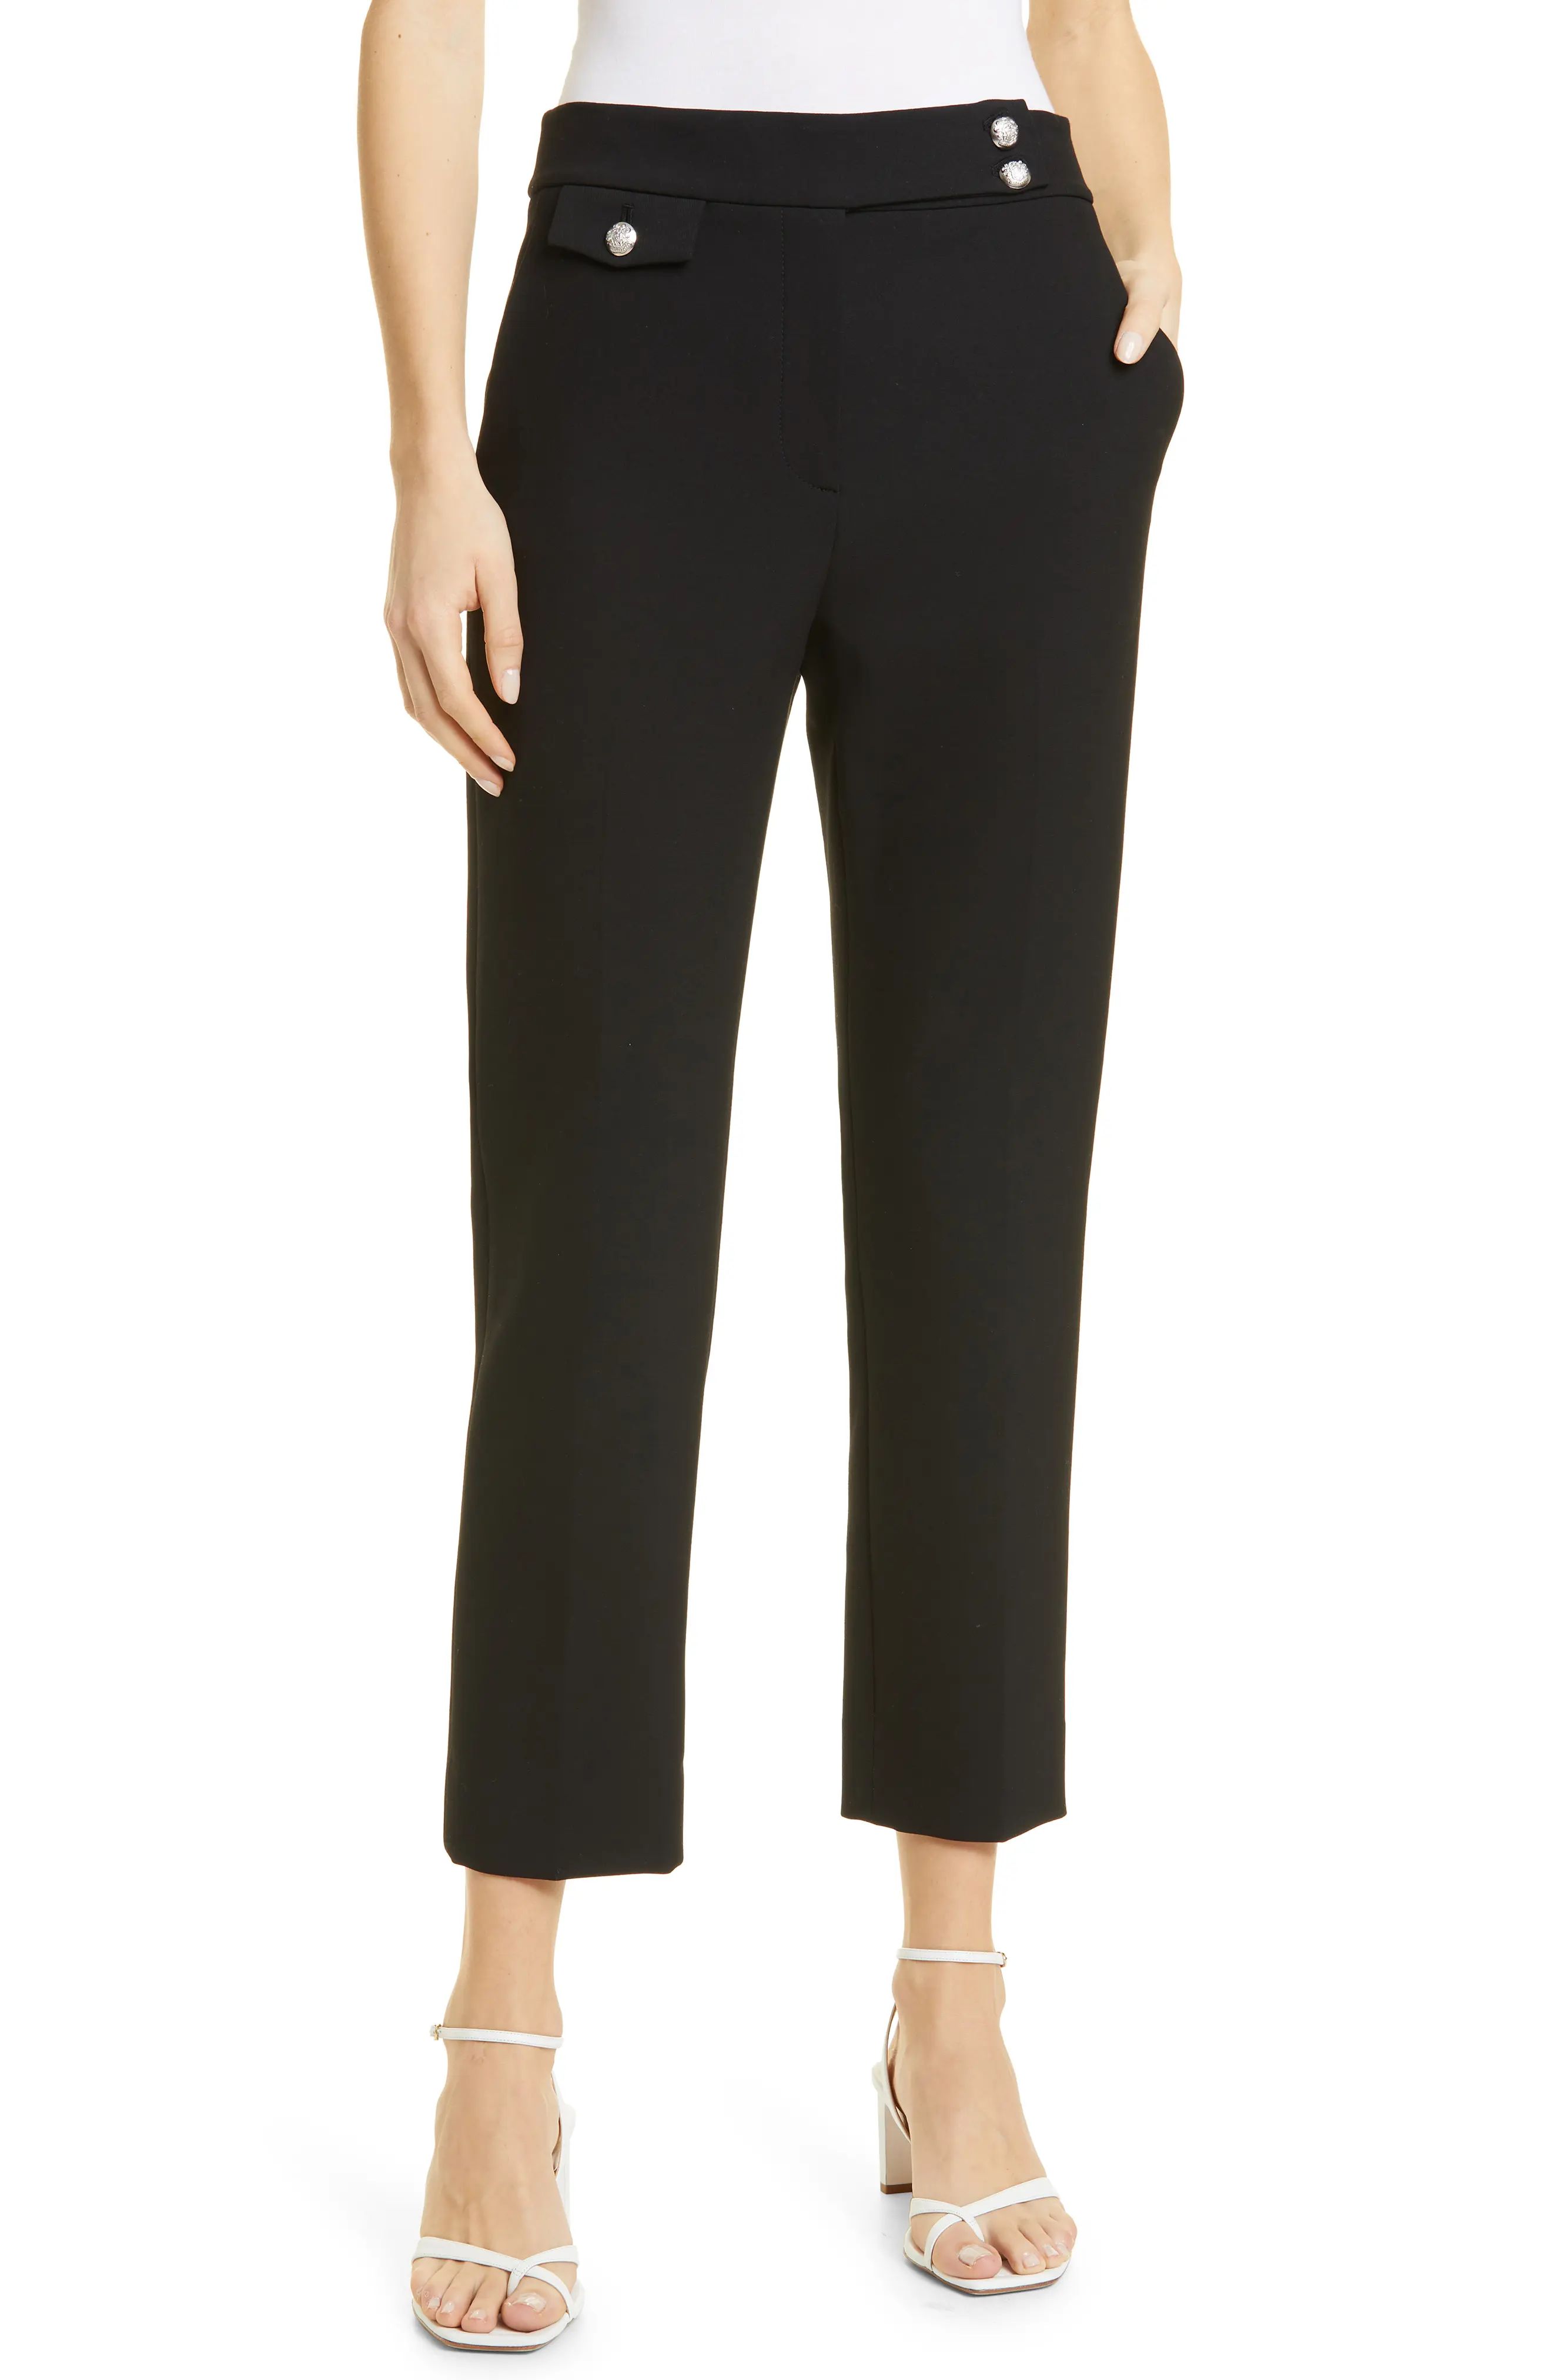 Veronica Beard Renzo Crop Cotton Blend Trousers in Black at Nordstrom, Size 0 | Nordstrom